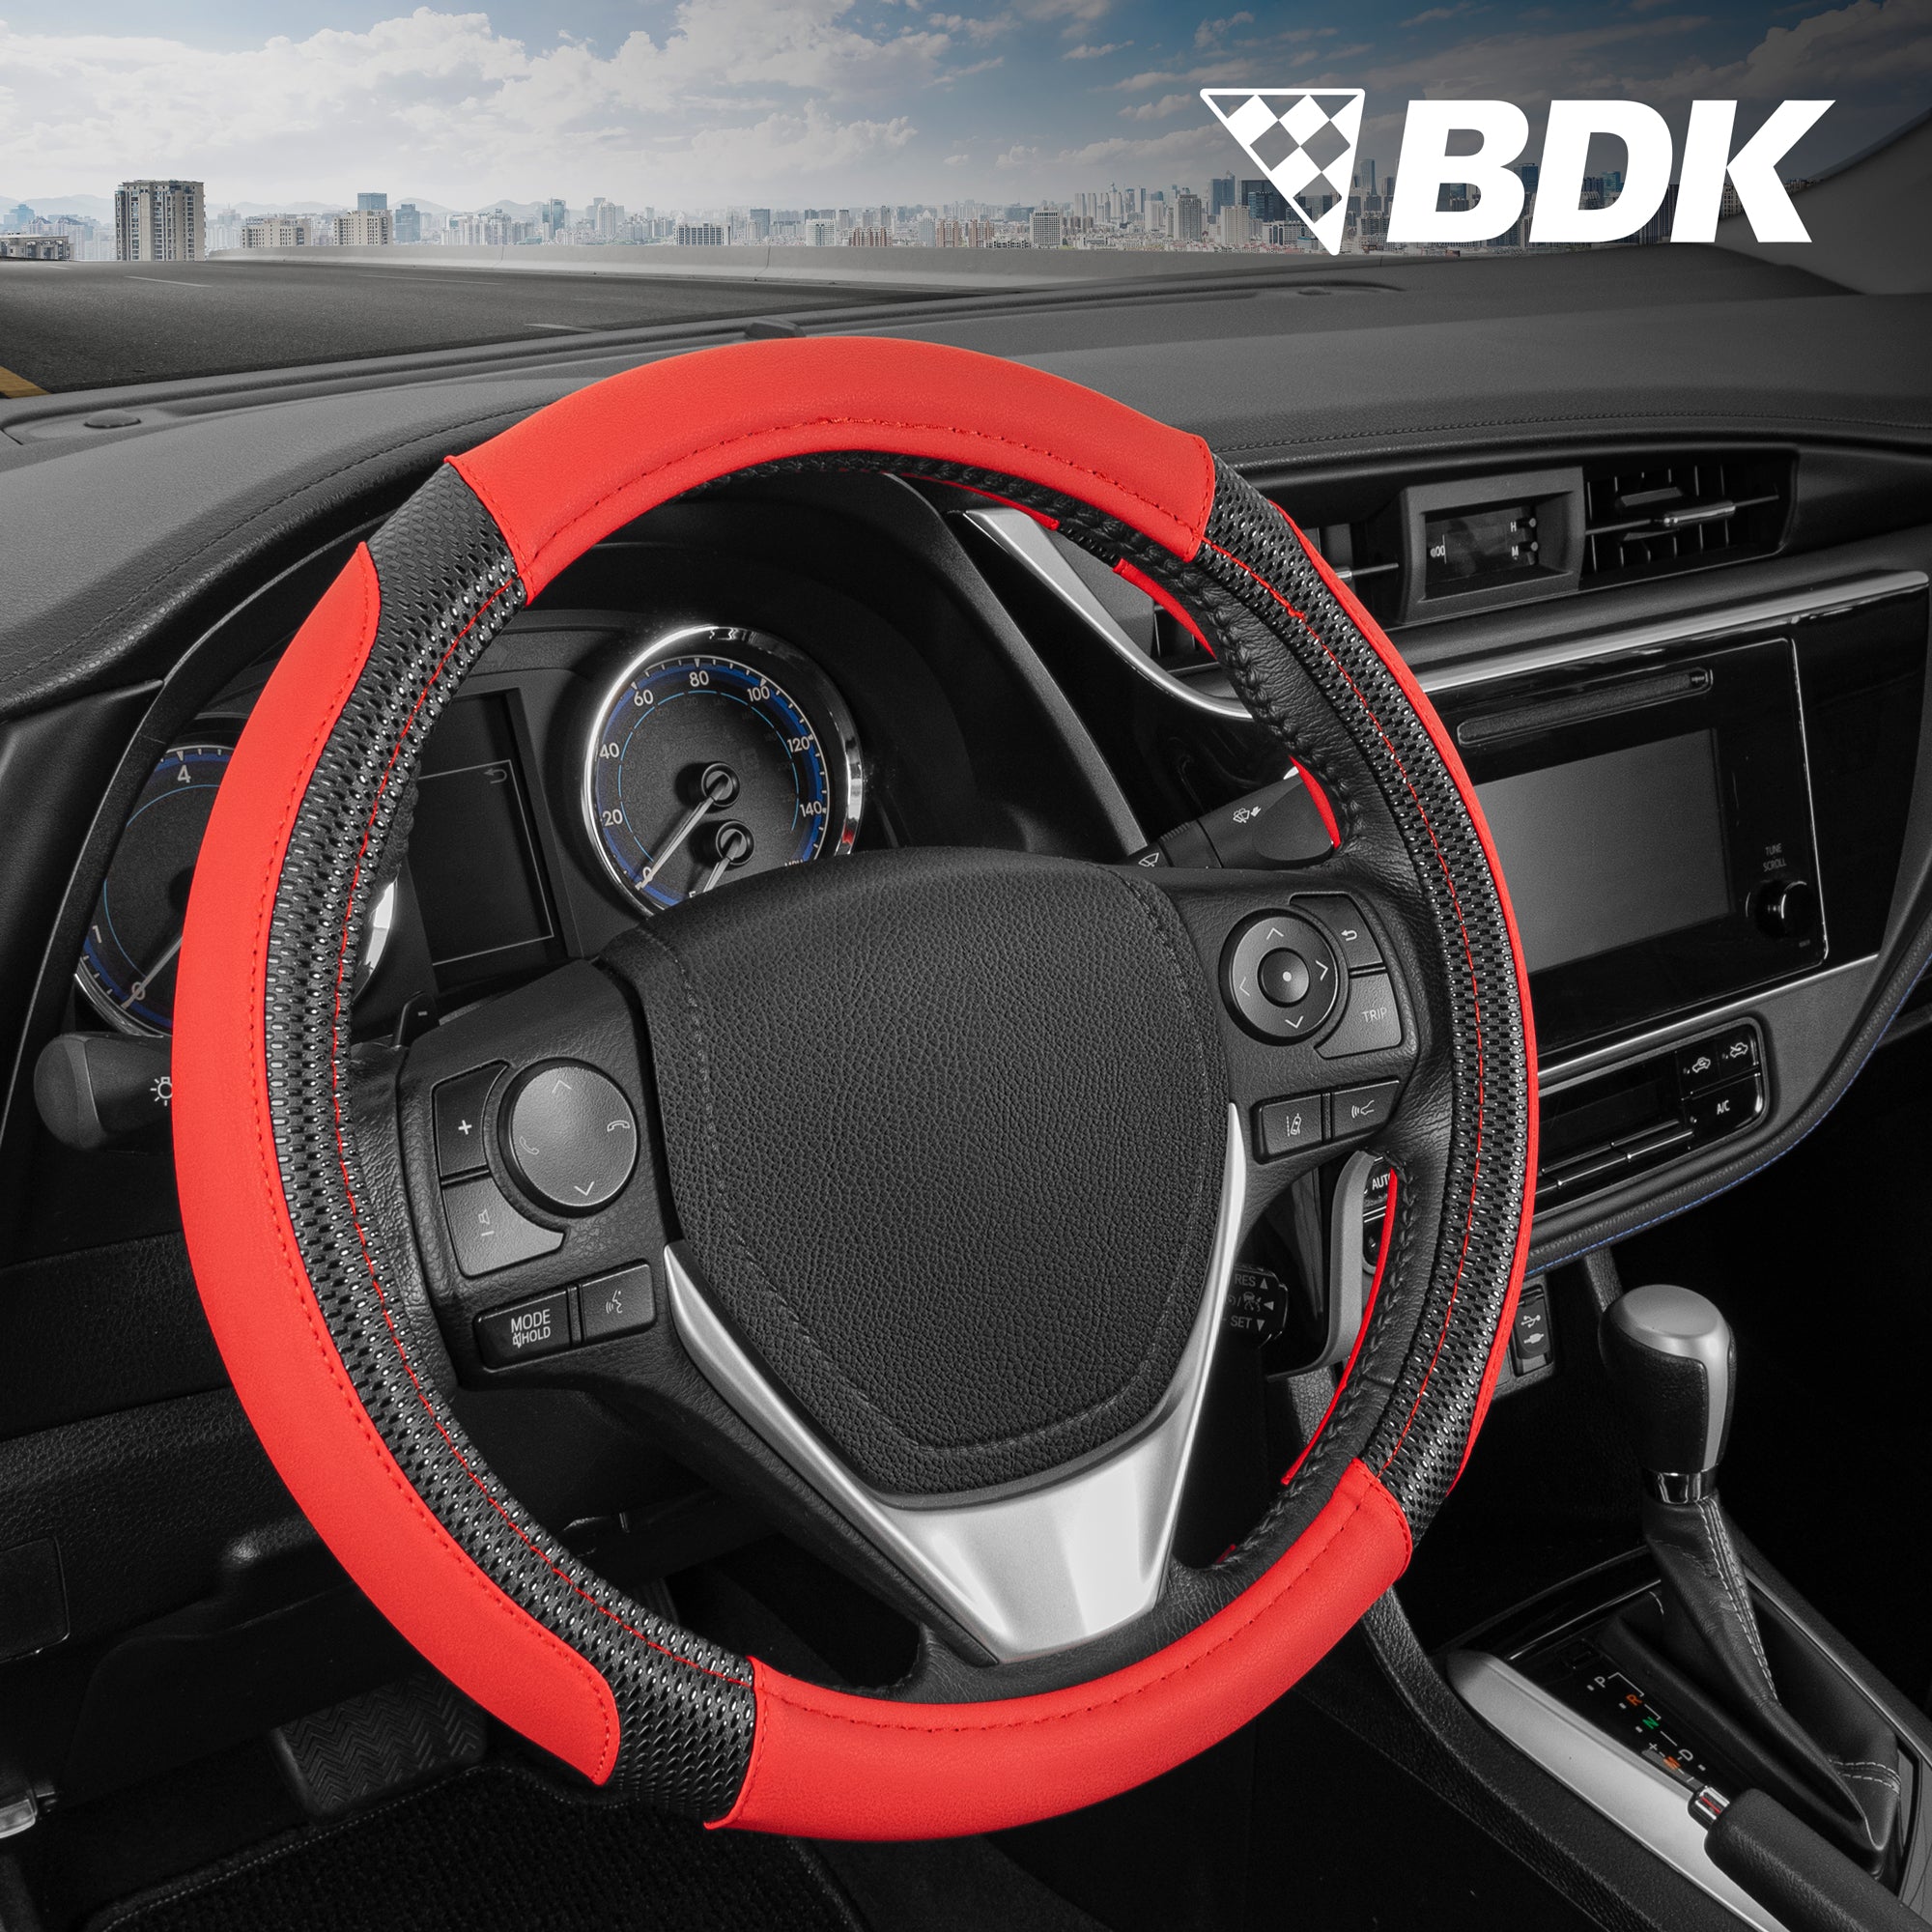 BDK GripTech Sport Red Steering Wheel Cover for Car Truck Van SUV, Standard 15 inch Size, Two-Tone Advanced Traction Grip, Comfortable Ergonomic Car Steering Wheel Cover